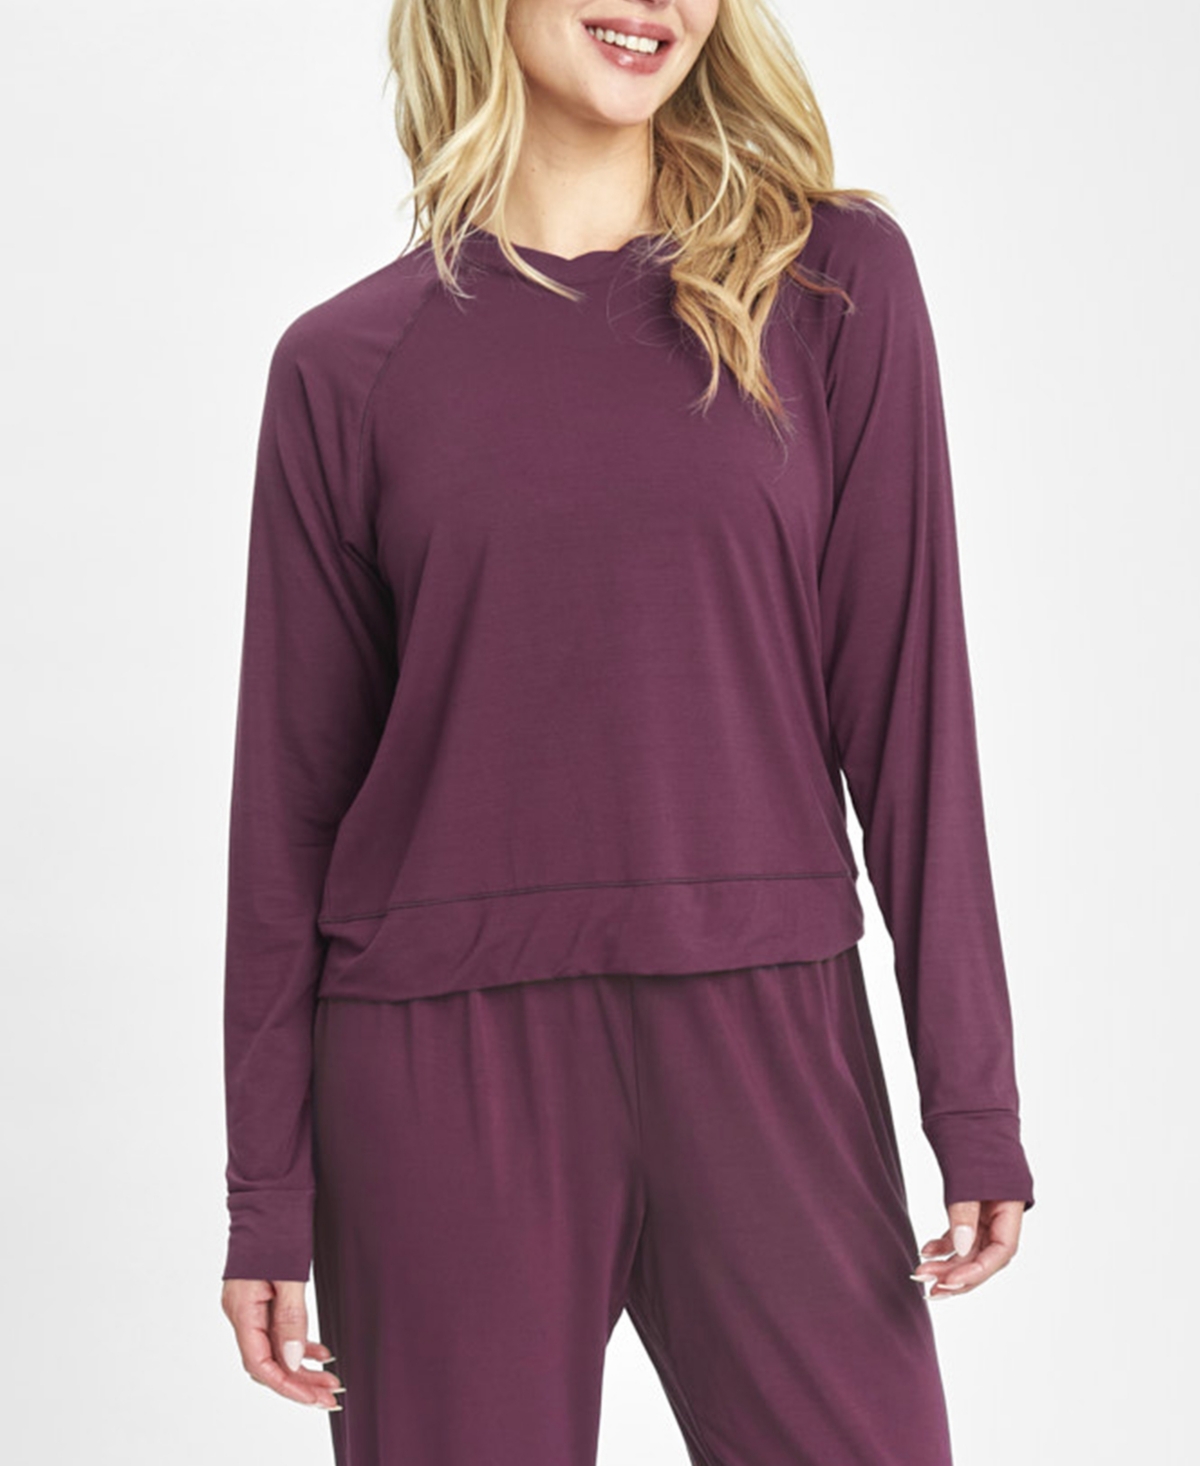 Women's The All-Day Crew Neck Long-Sleeve Top - Plum